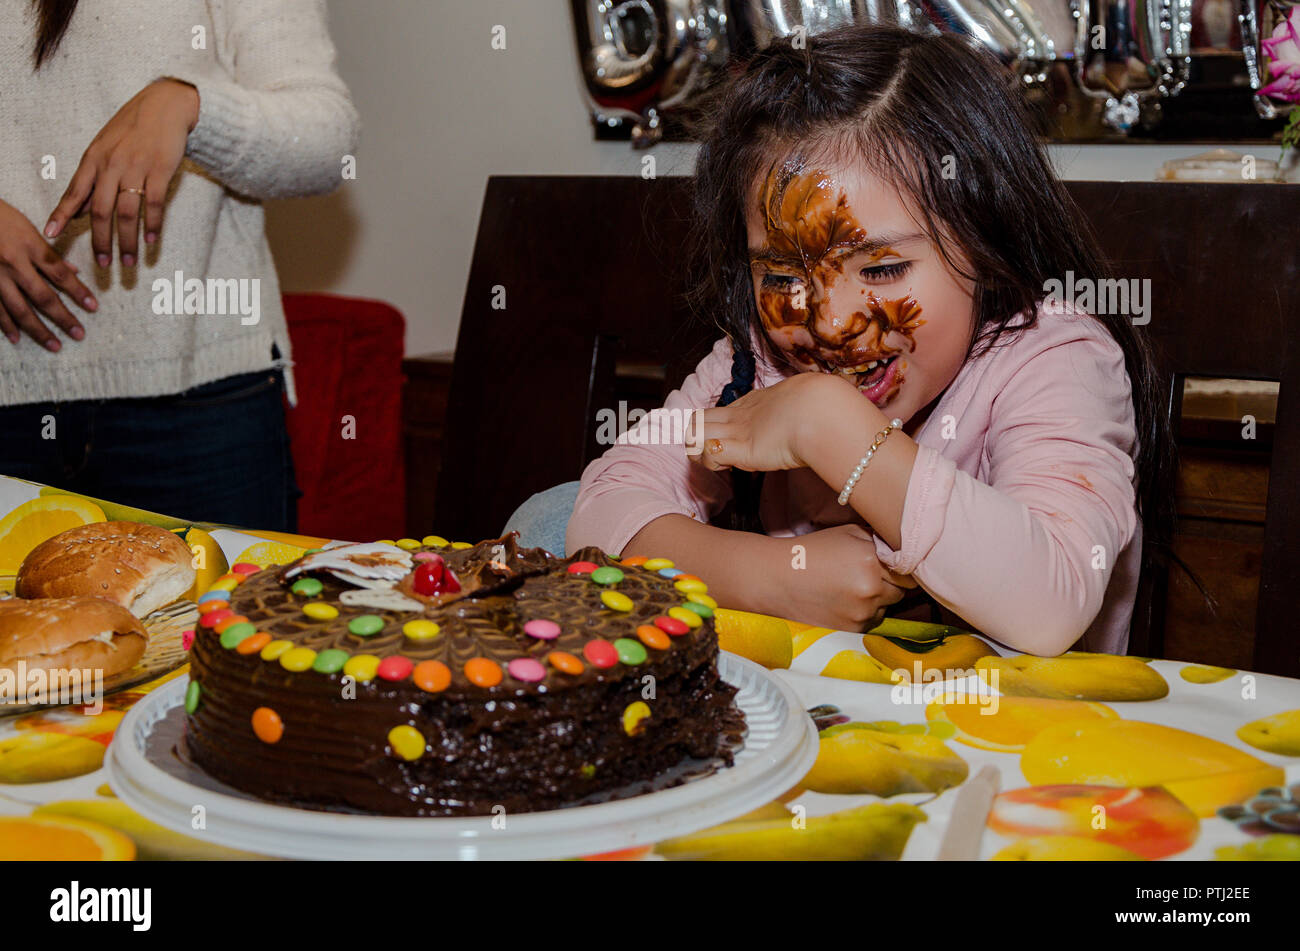 6 year old girl celebrating her birthday by putting her face inside the chocolate cake Stock Photo